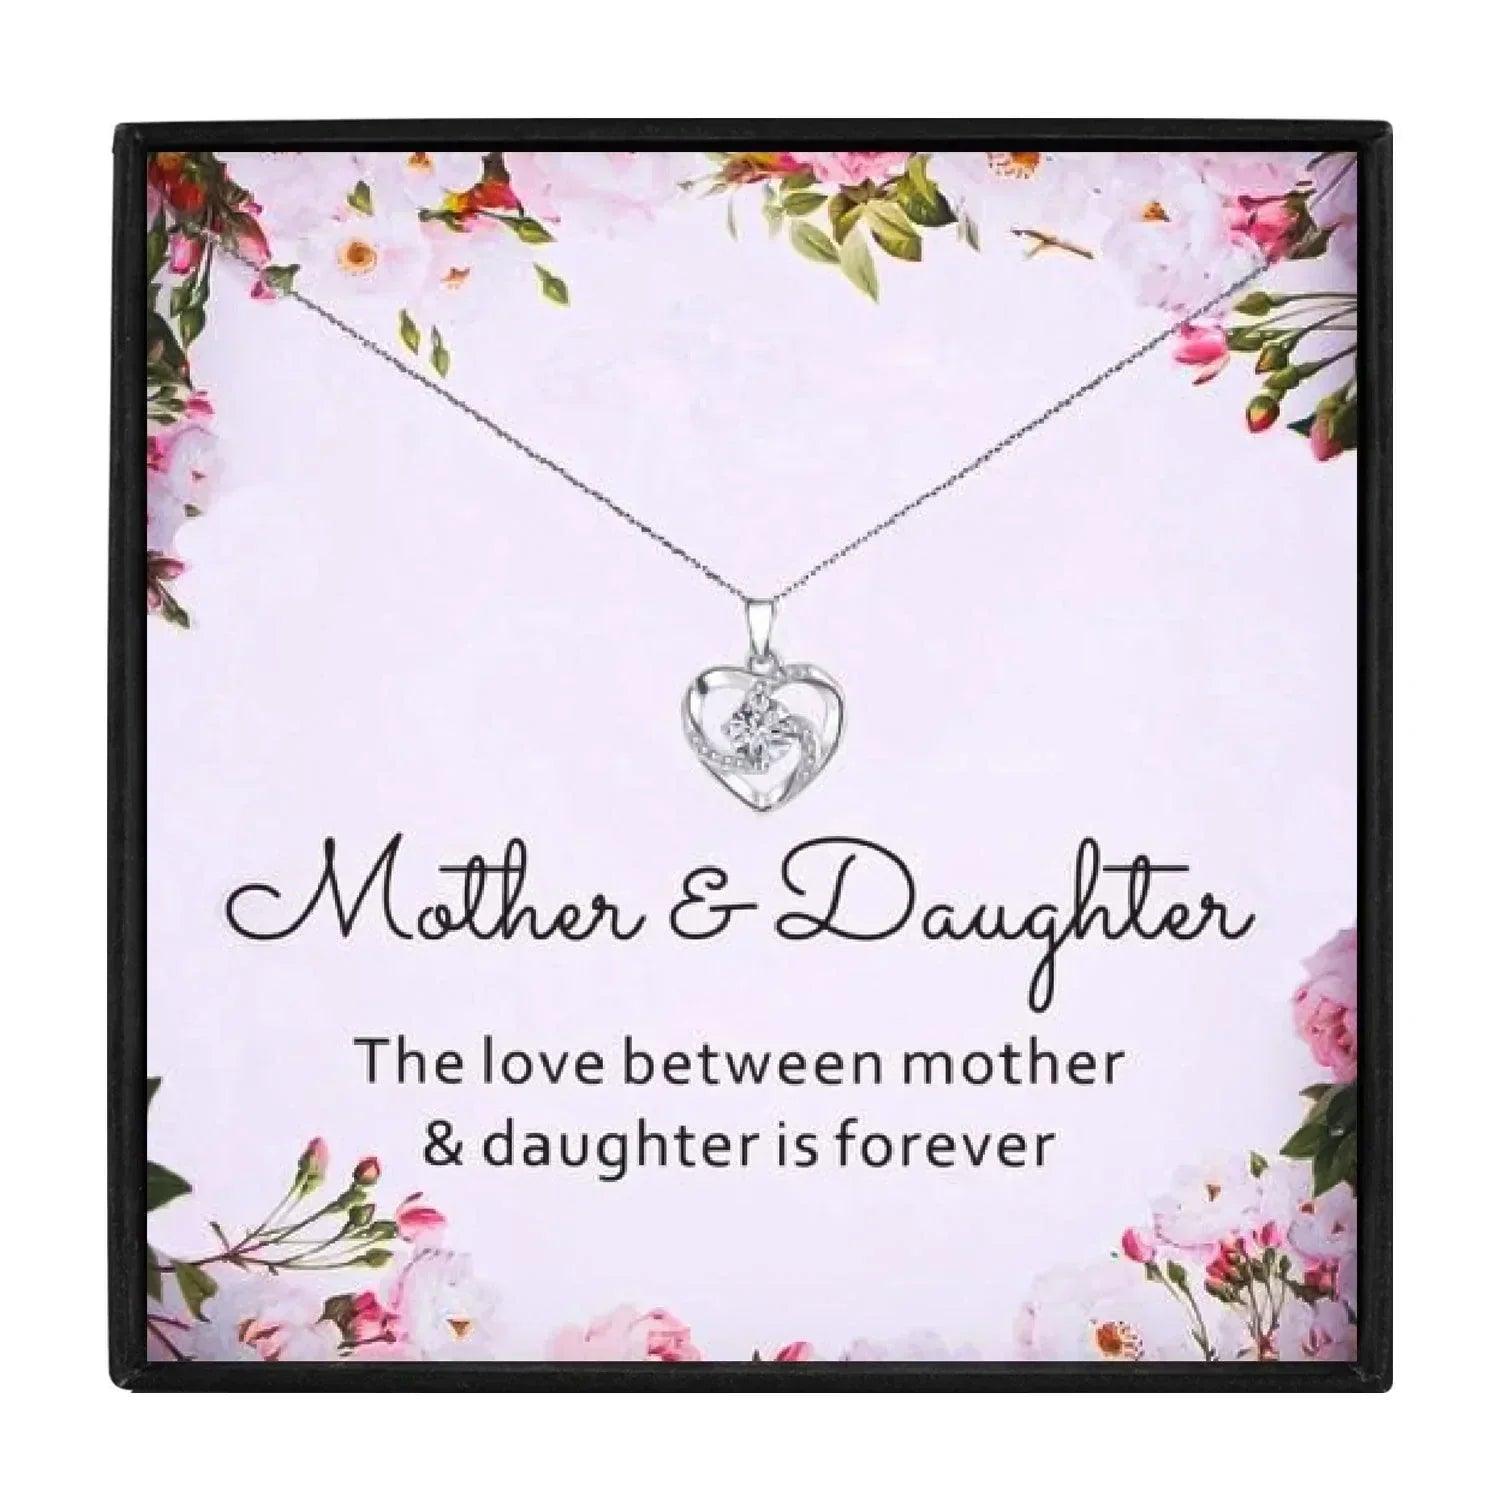 Mother Daughter Heart Pendant Necklaces in 2023 | Mother Daughter Heart Pendant Necklaces - undefined | daughter gift ideas, mother and daughter, Mother and Daughter Heart Necklaces, Mother Daughter Gift Necklace | From Hunny Life | hunnylife.com